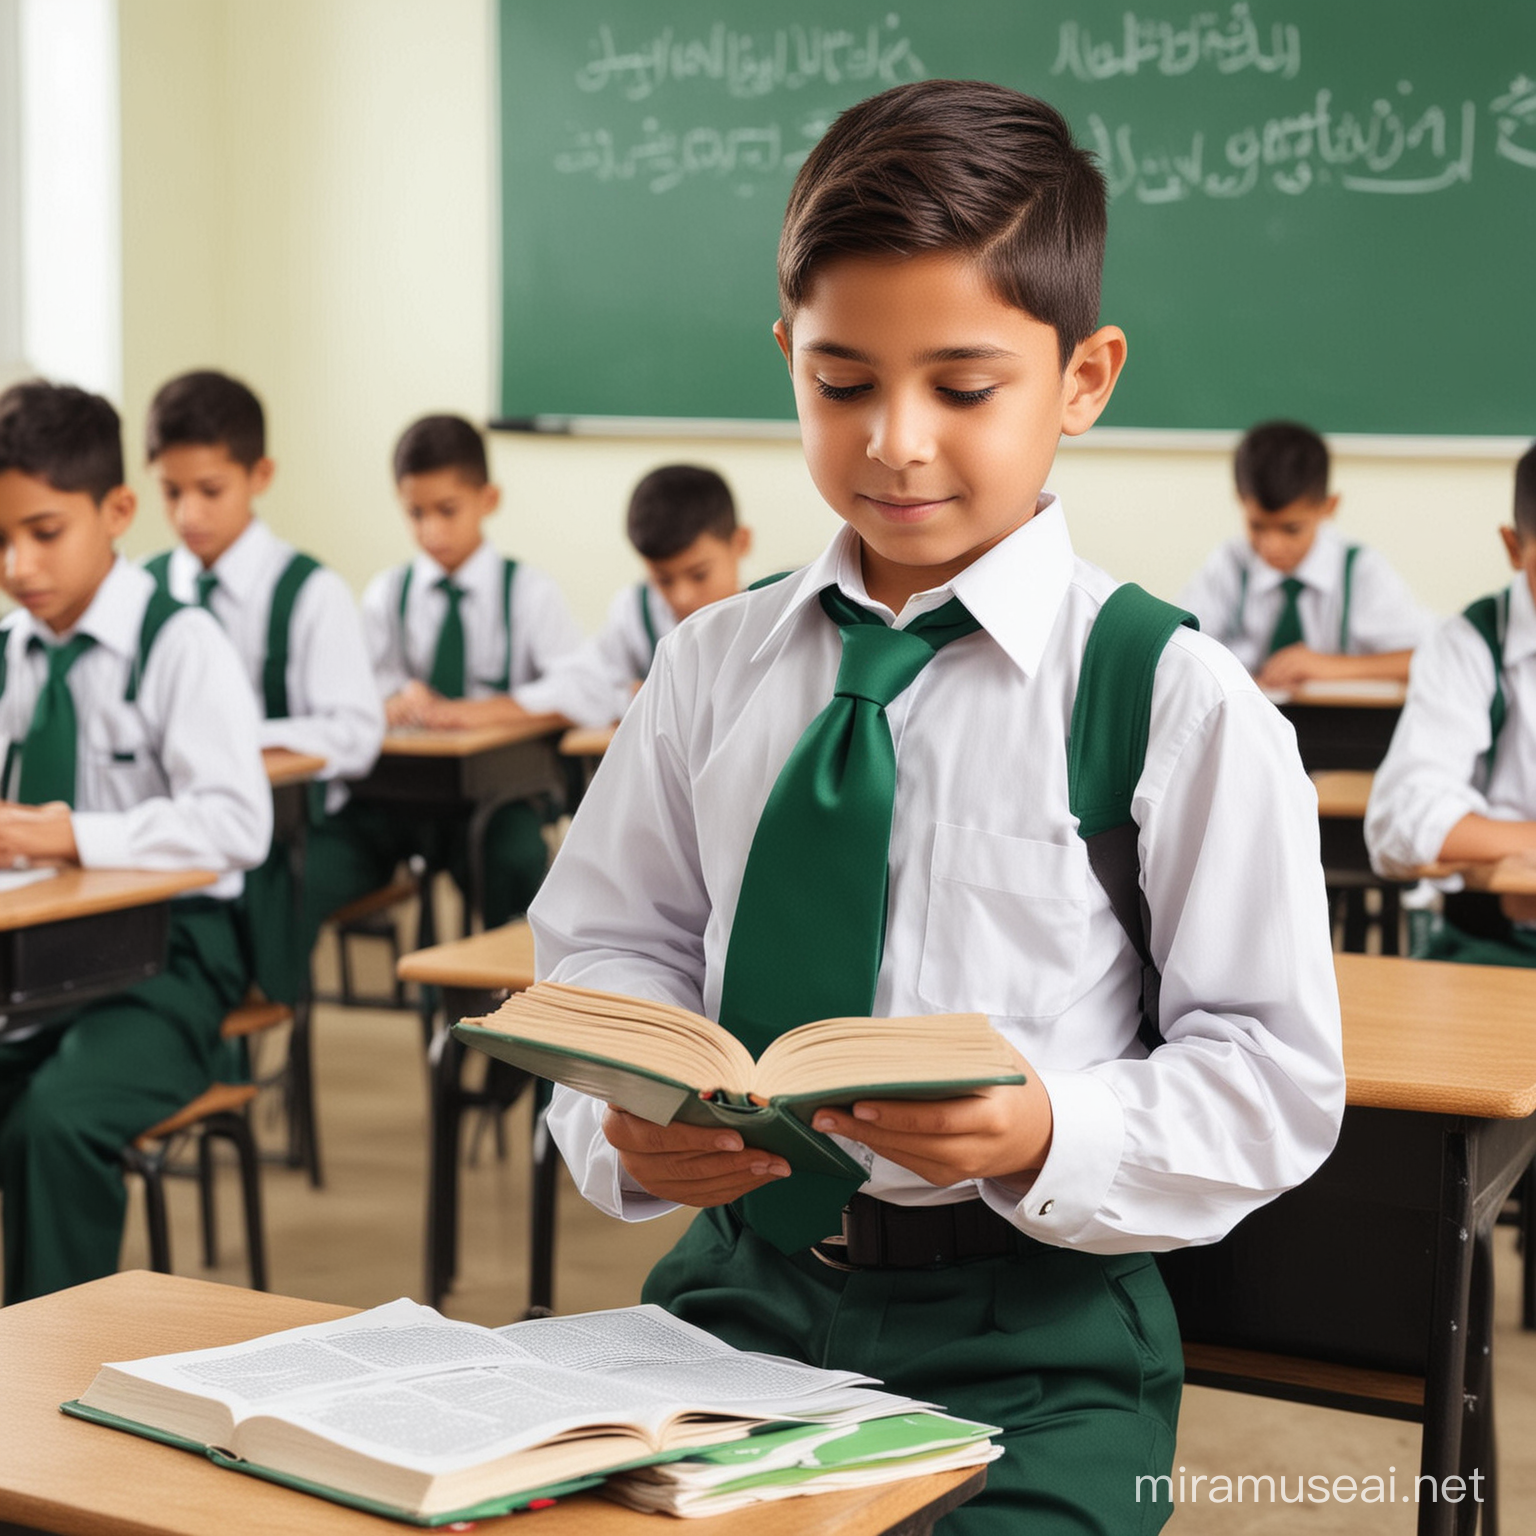 Student in Classroom Holding Book with Zakat Support Message